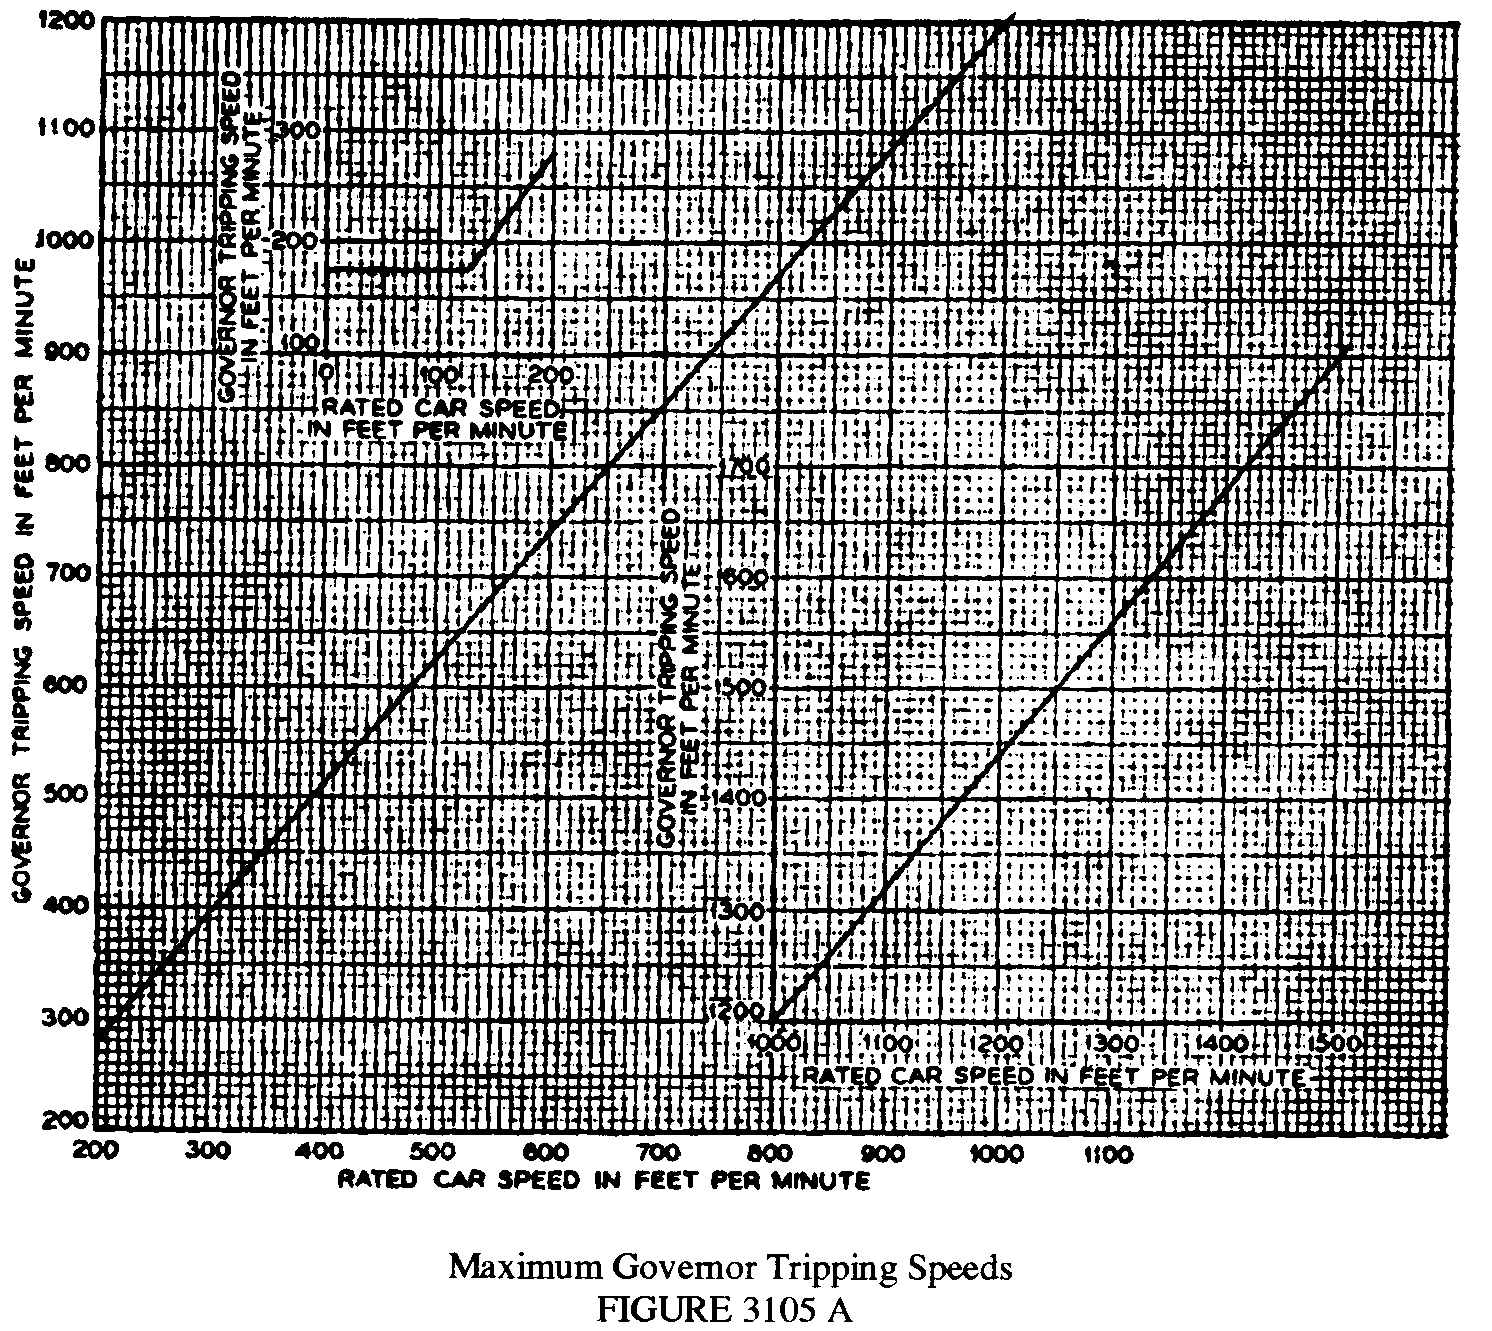 Image 1 within § 3105. Governor Trip Speeds and Approval Data.